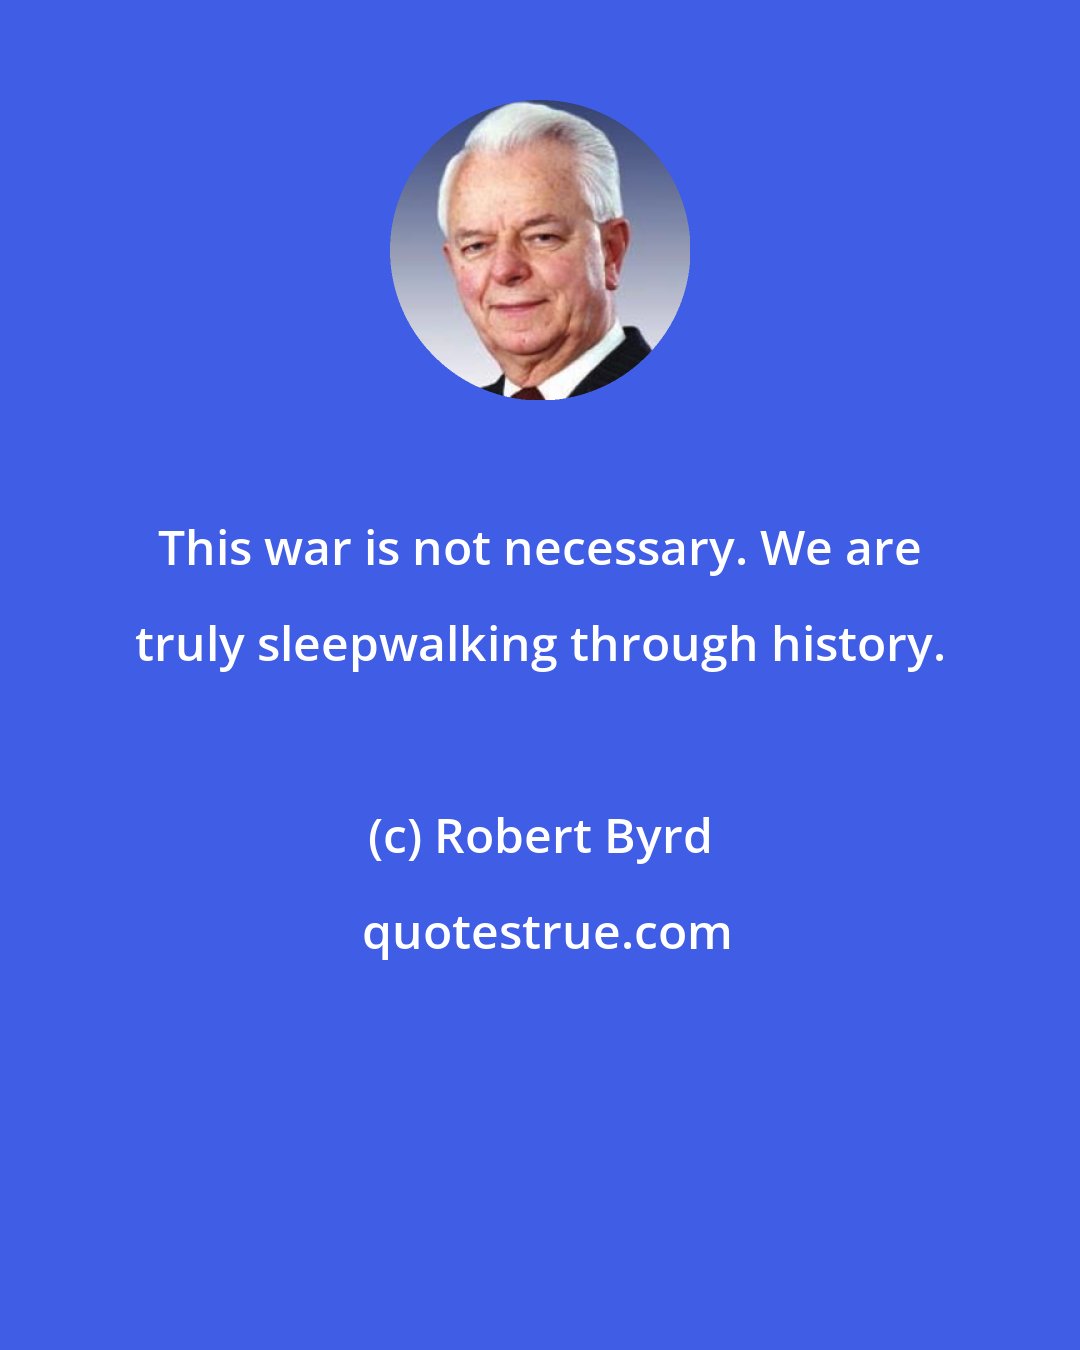 Robert Byrd: This war is not necessary. We are truly sleepwalking through history.